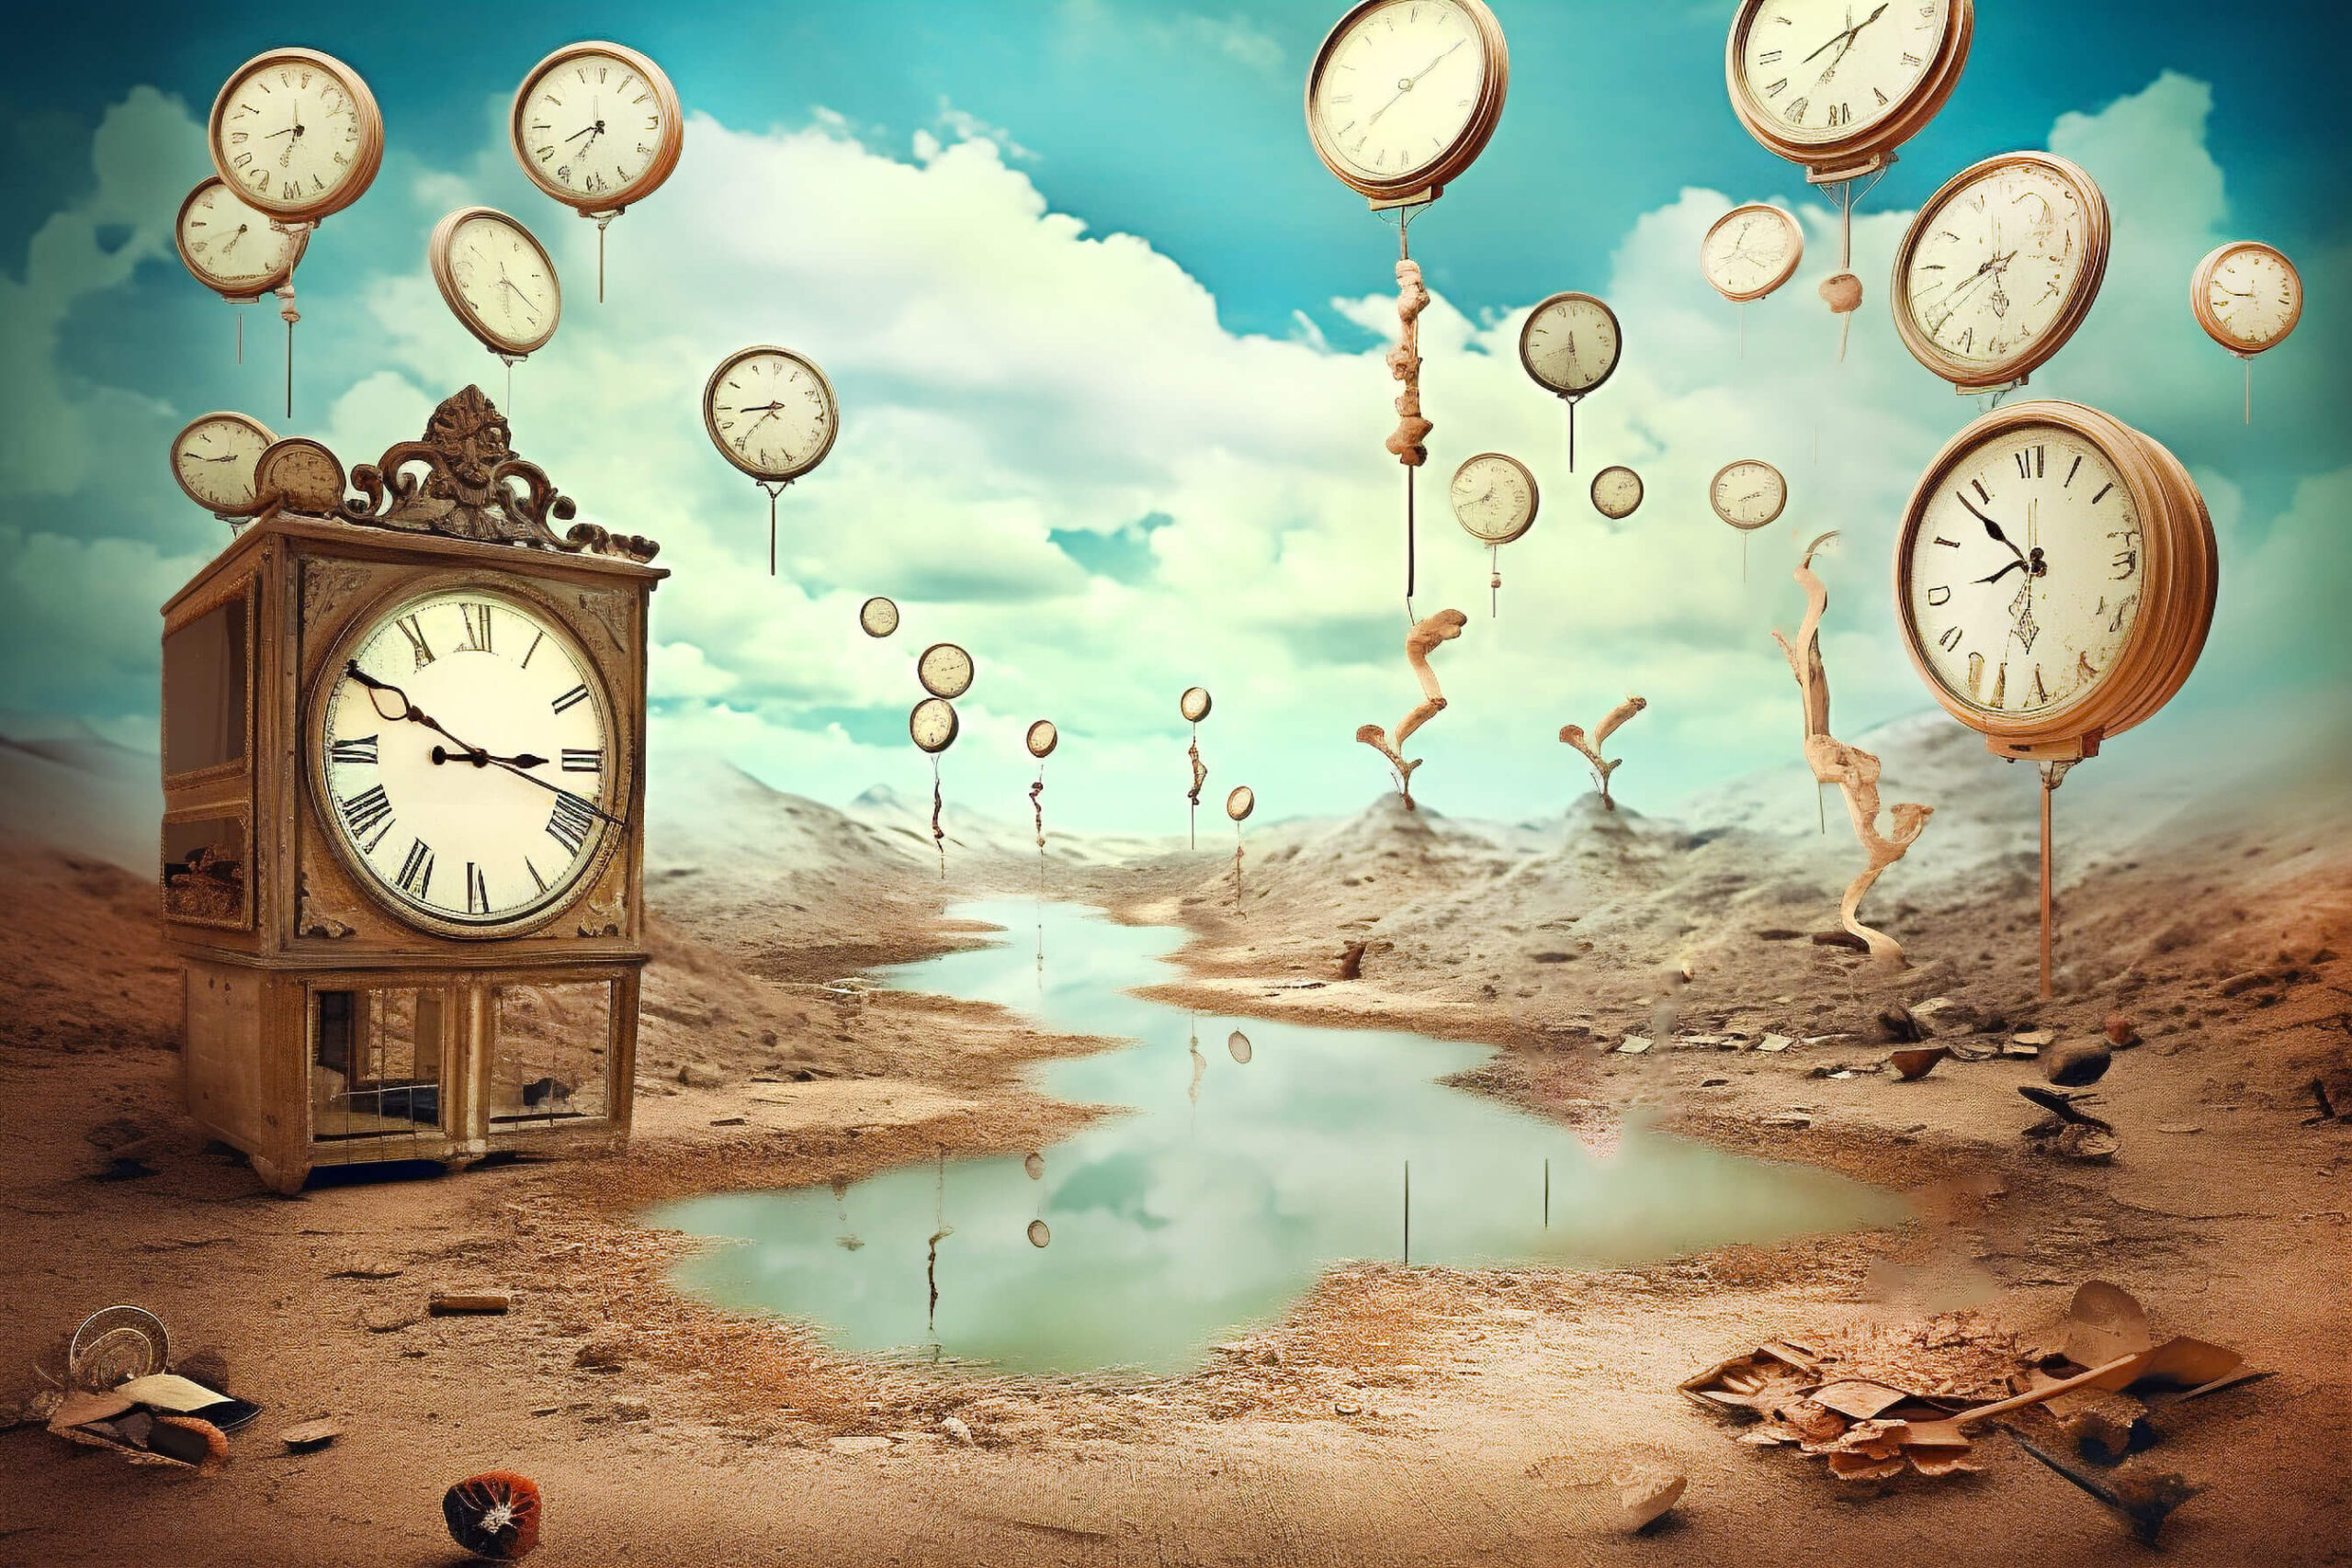 A surrealist painting with floating clocks